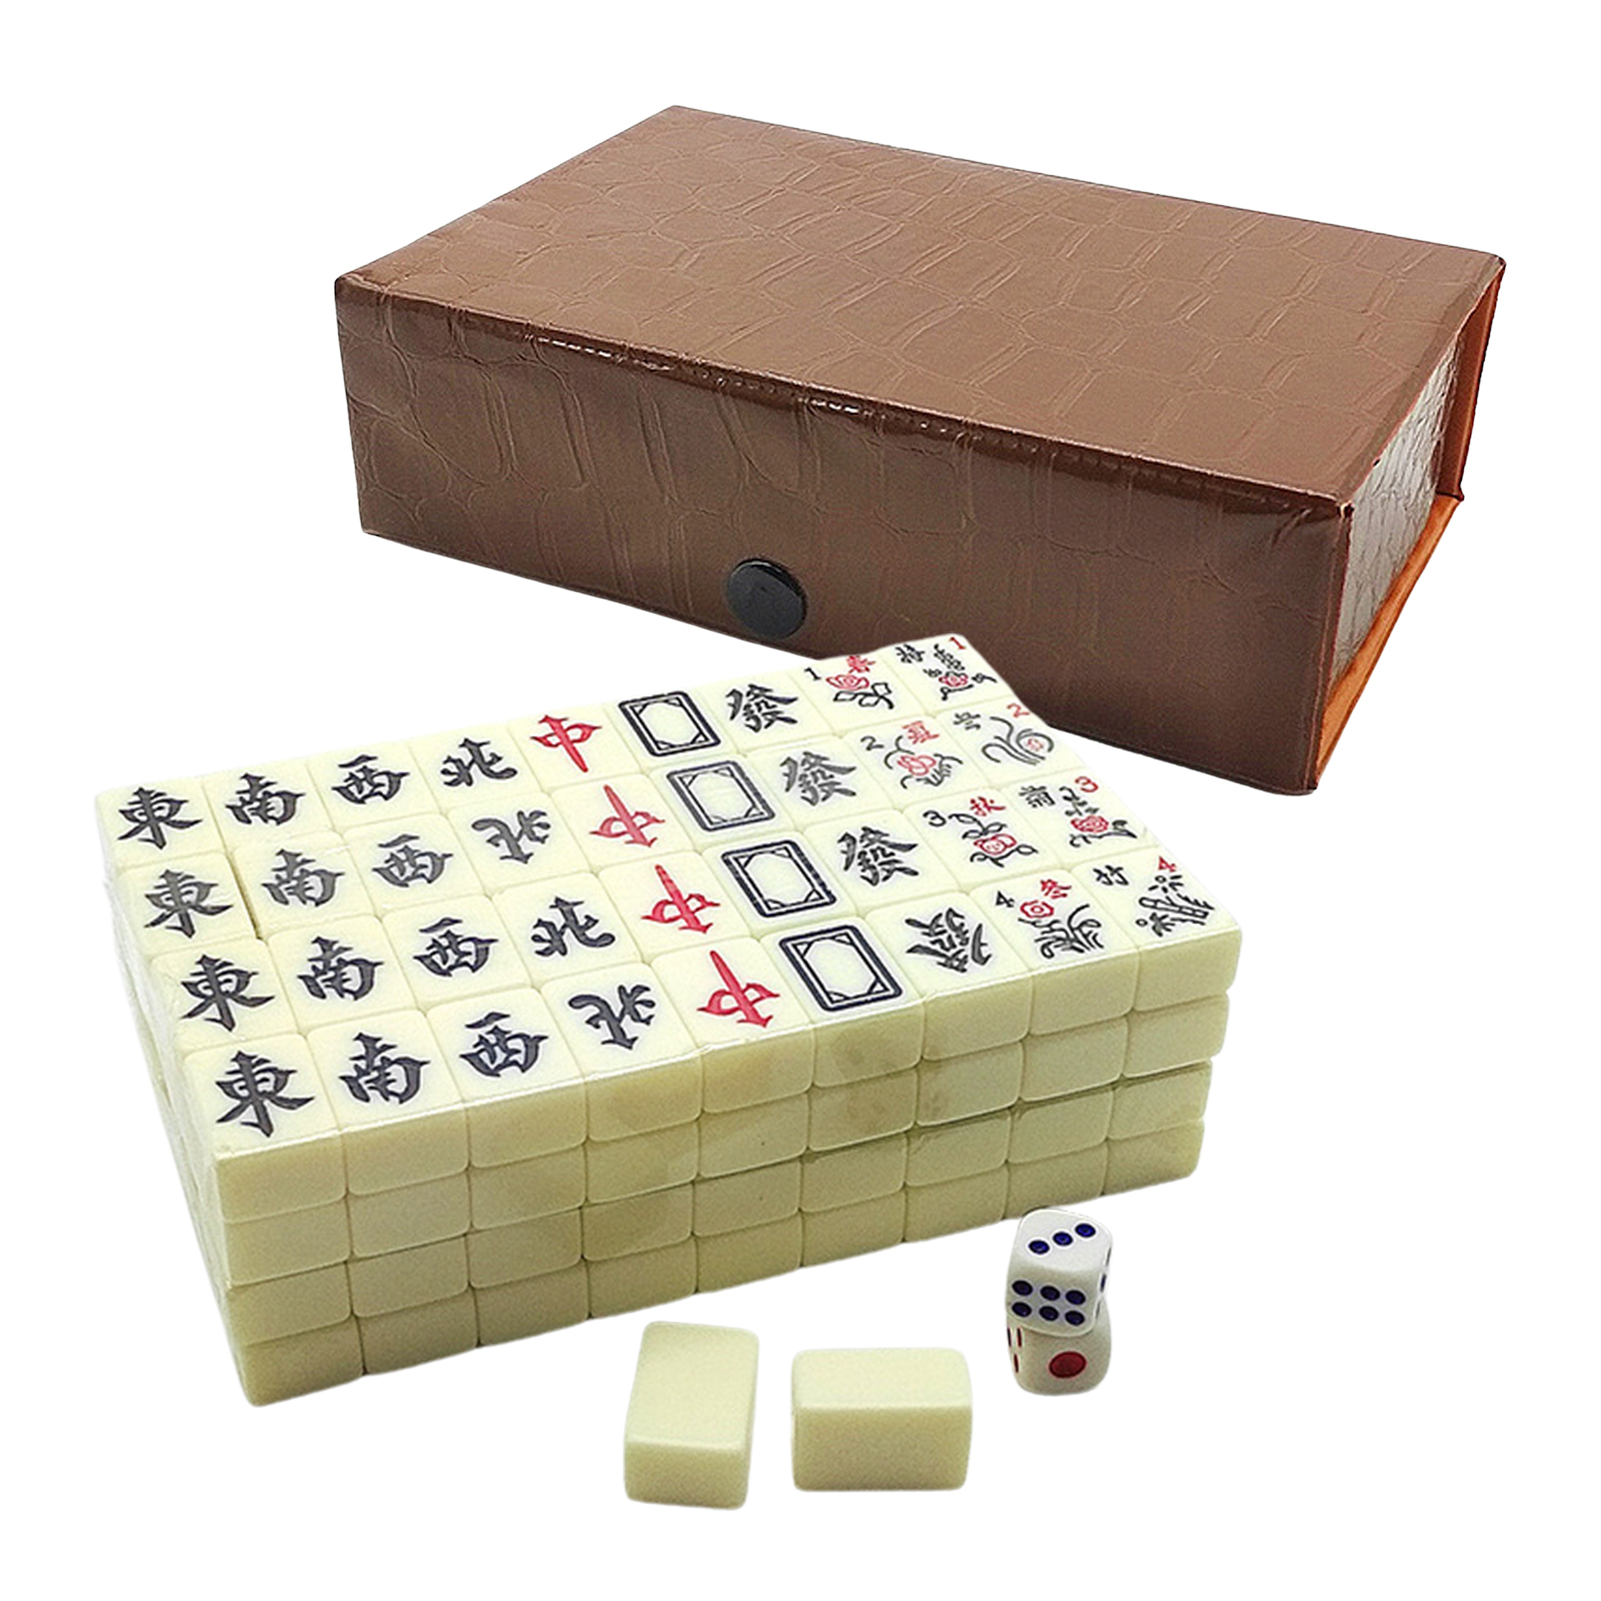 146 PCS/set Mini Little Mahjong Chinese Traditional Mahjong Board Game Family Toy Chinese Numbers Exquisitely Carved Home Games